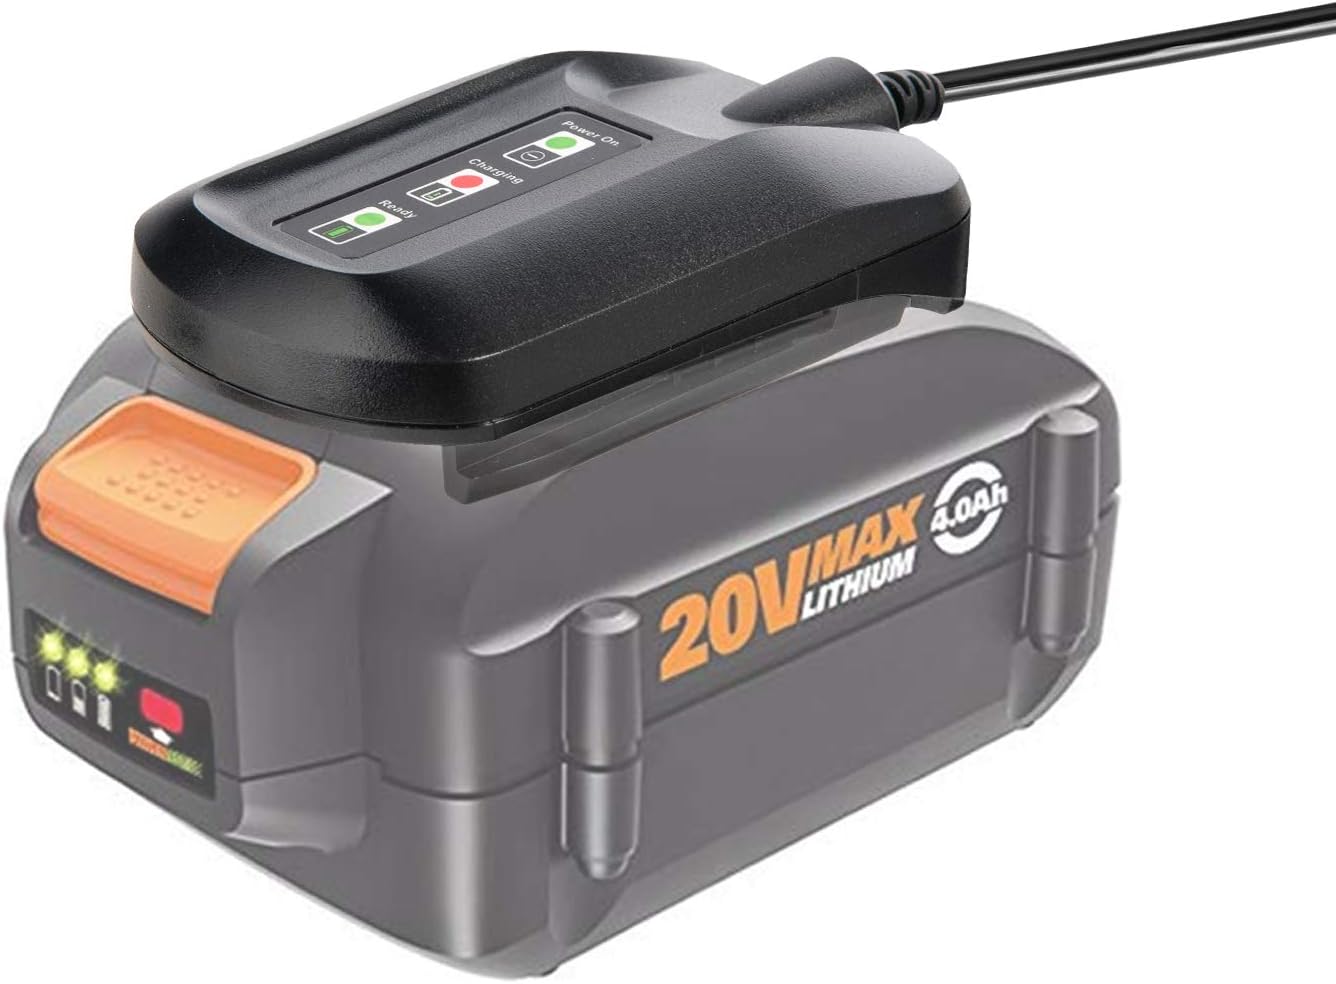 CELL9102 WA3742 Charger for Worx 20V Lithium Battery WA3520 WA3525 WA3578,  Replacement Worx Battery Charger 20V WA3732 WA3875 WA3881